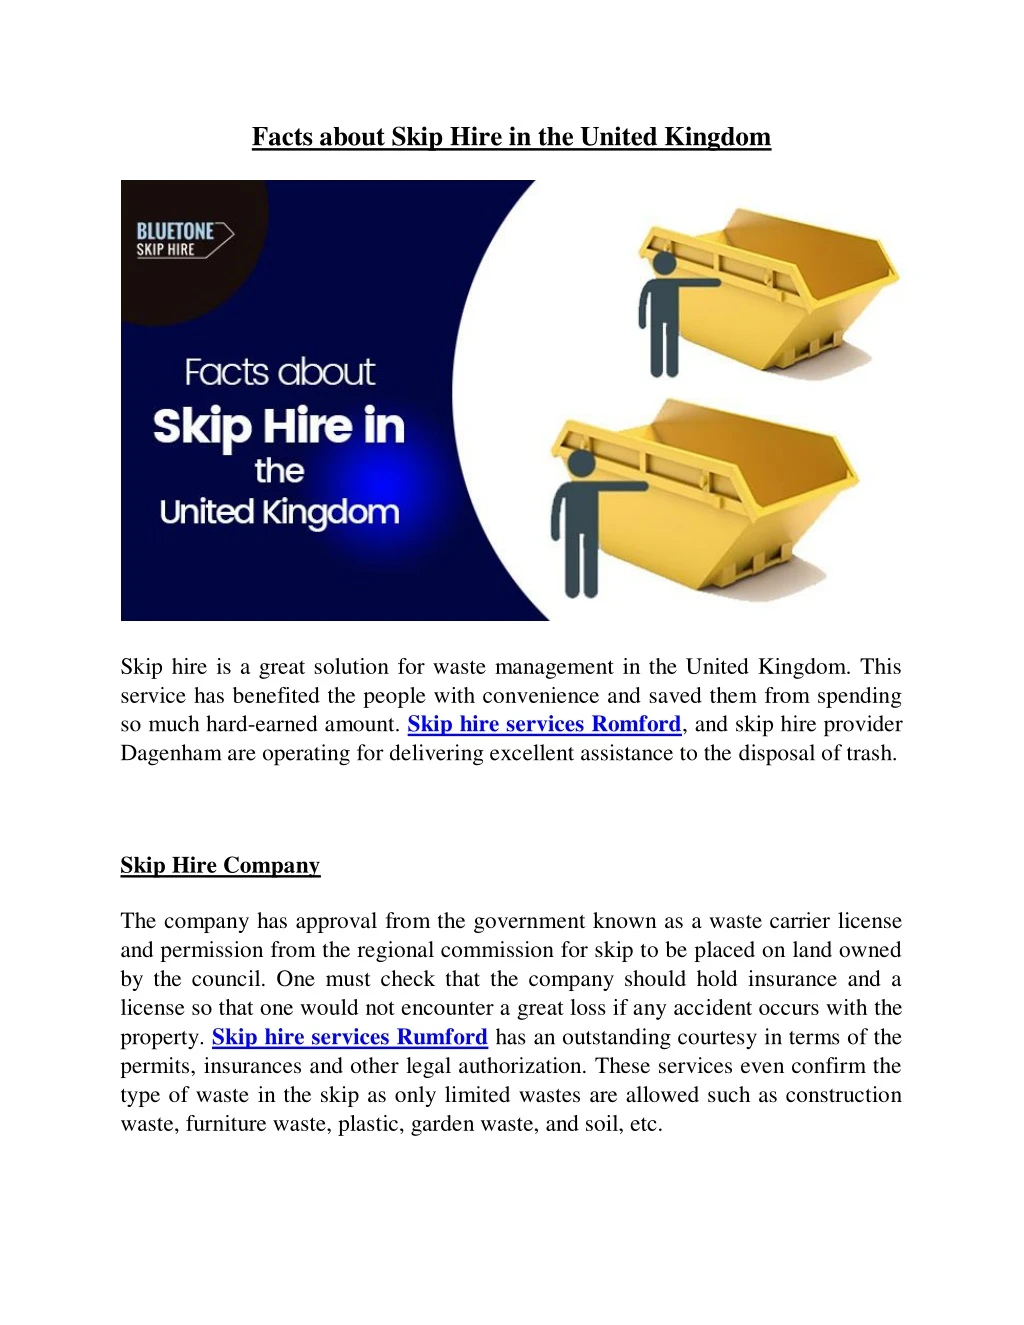 facts about skip hire in the united kingdom